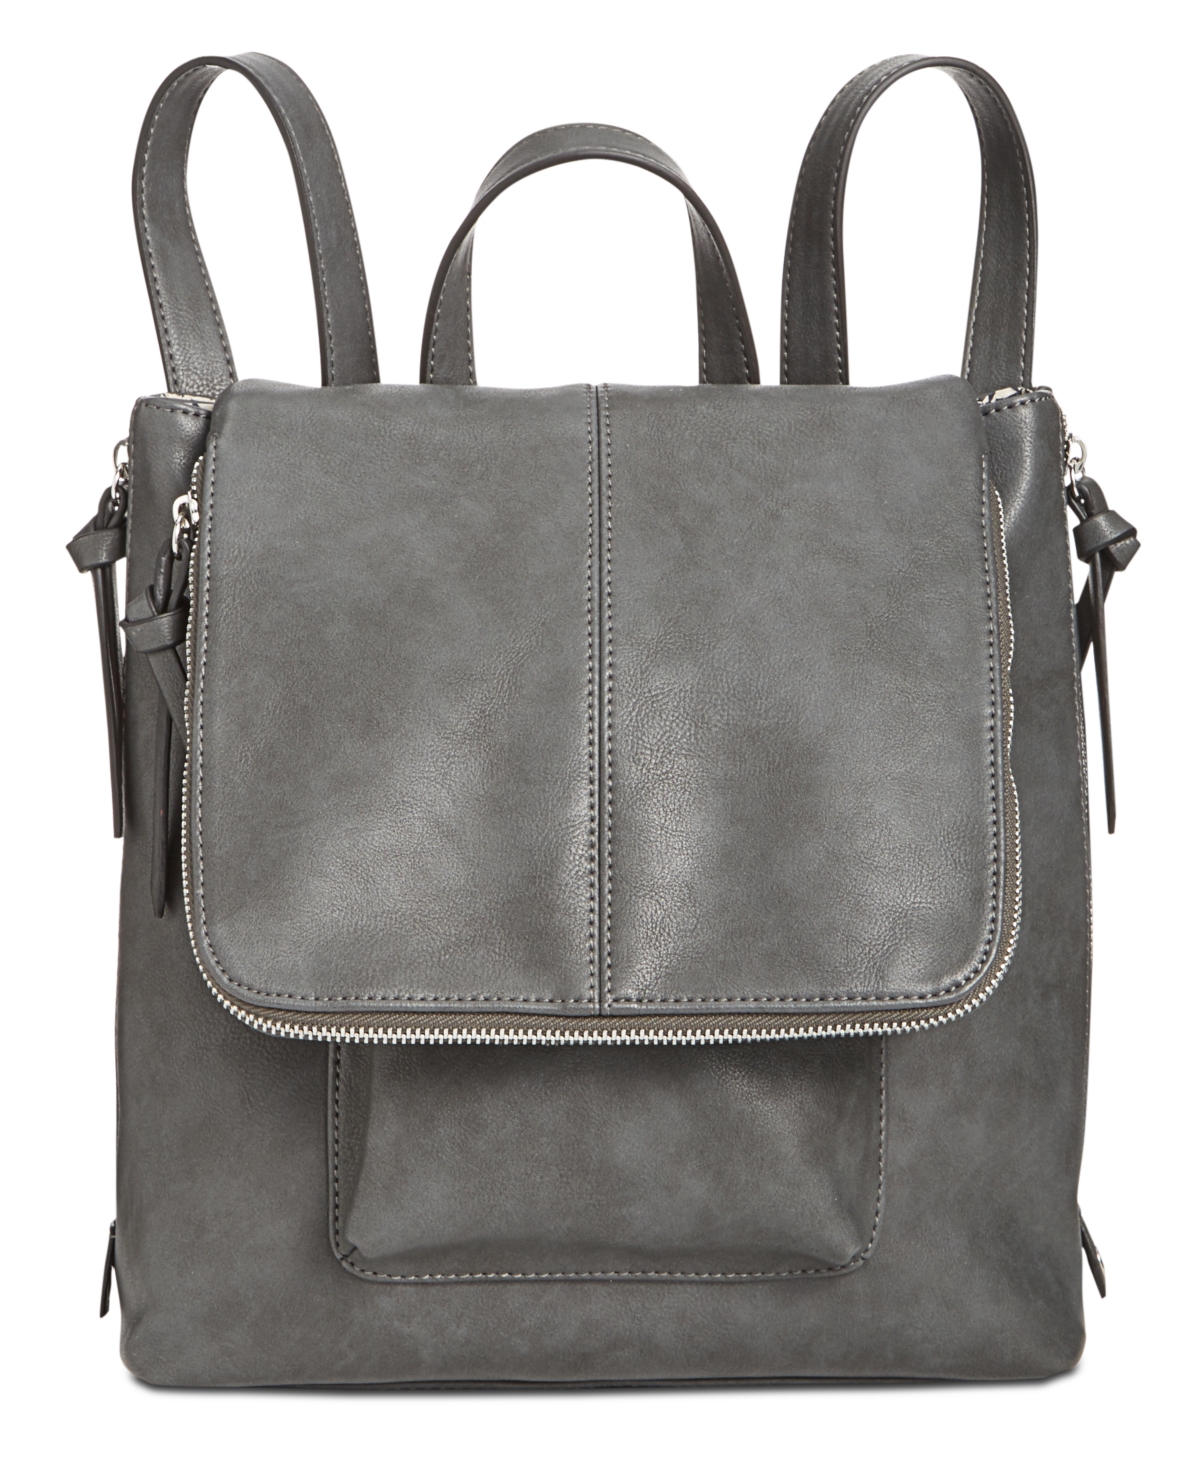 Elliah Convertible Backpack, Created for Macy's - Charcoal/Silver